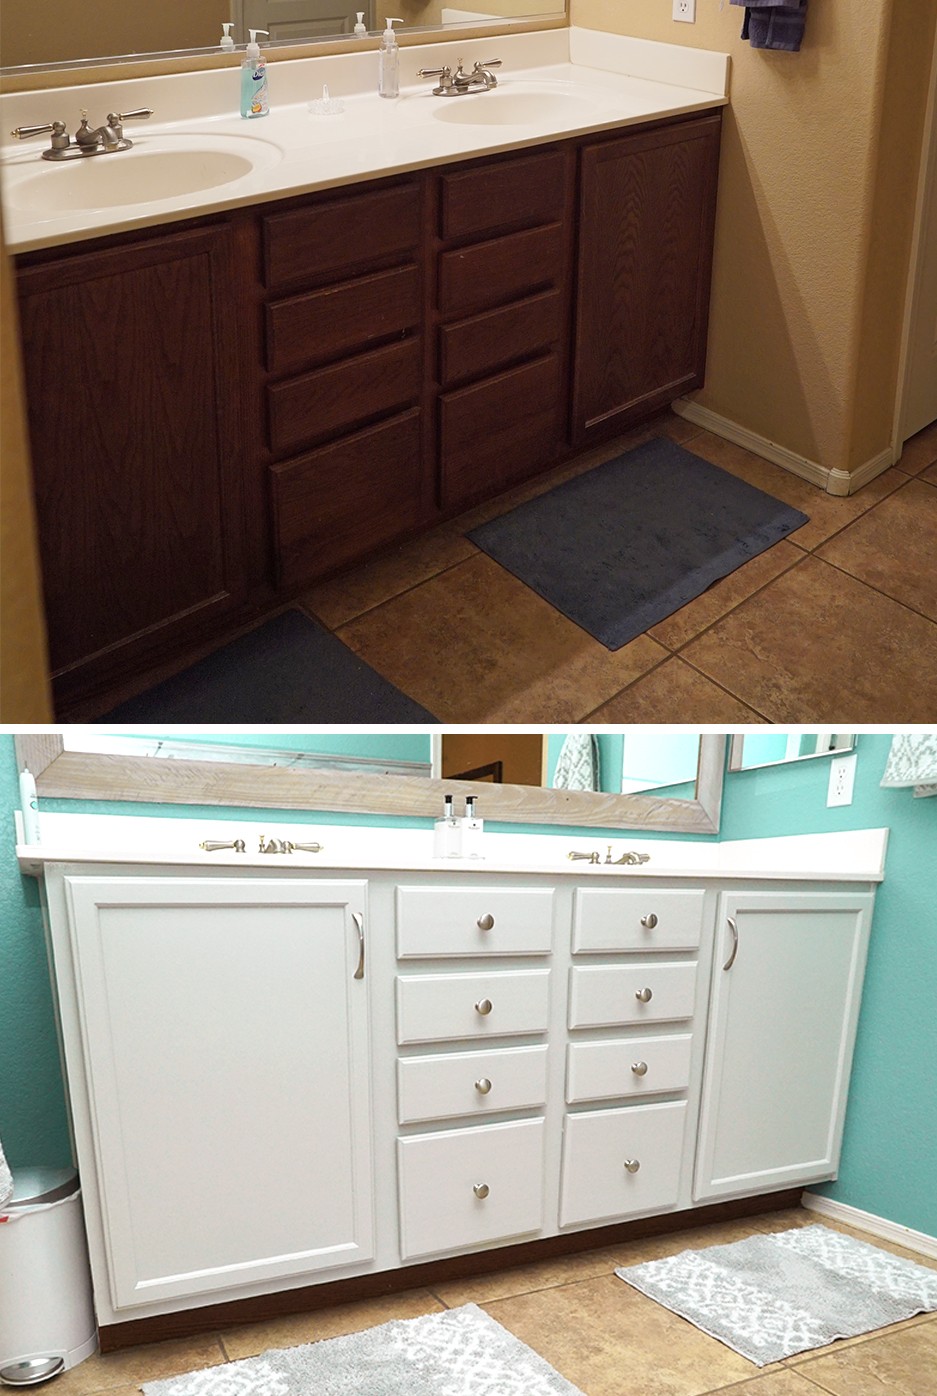 DIY Painted Cabinets